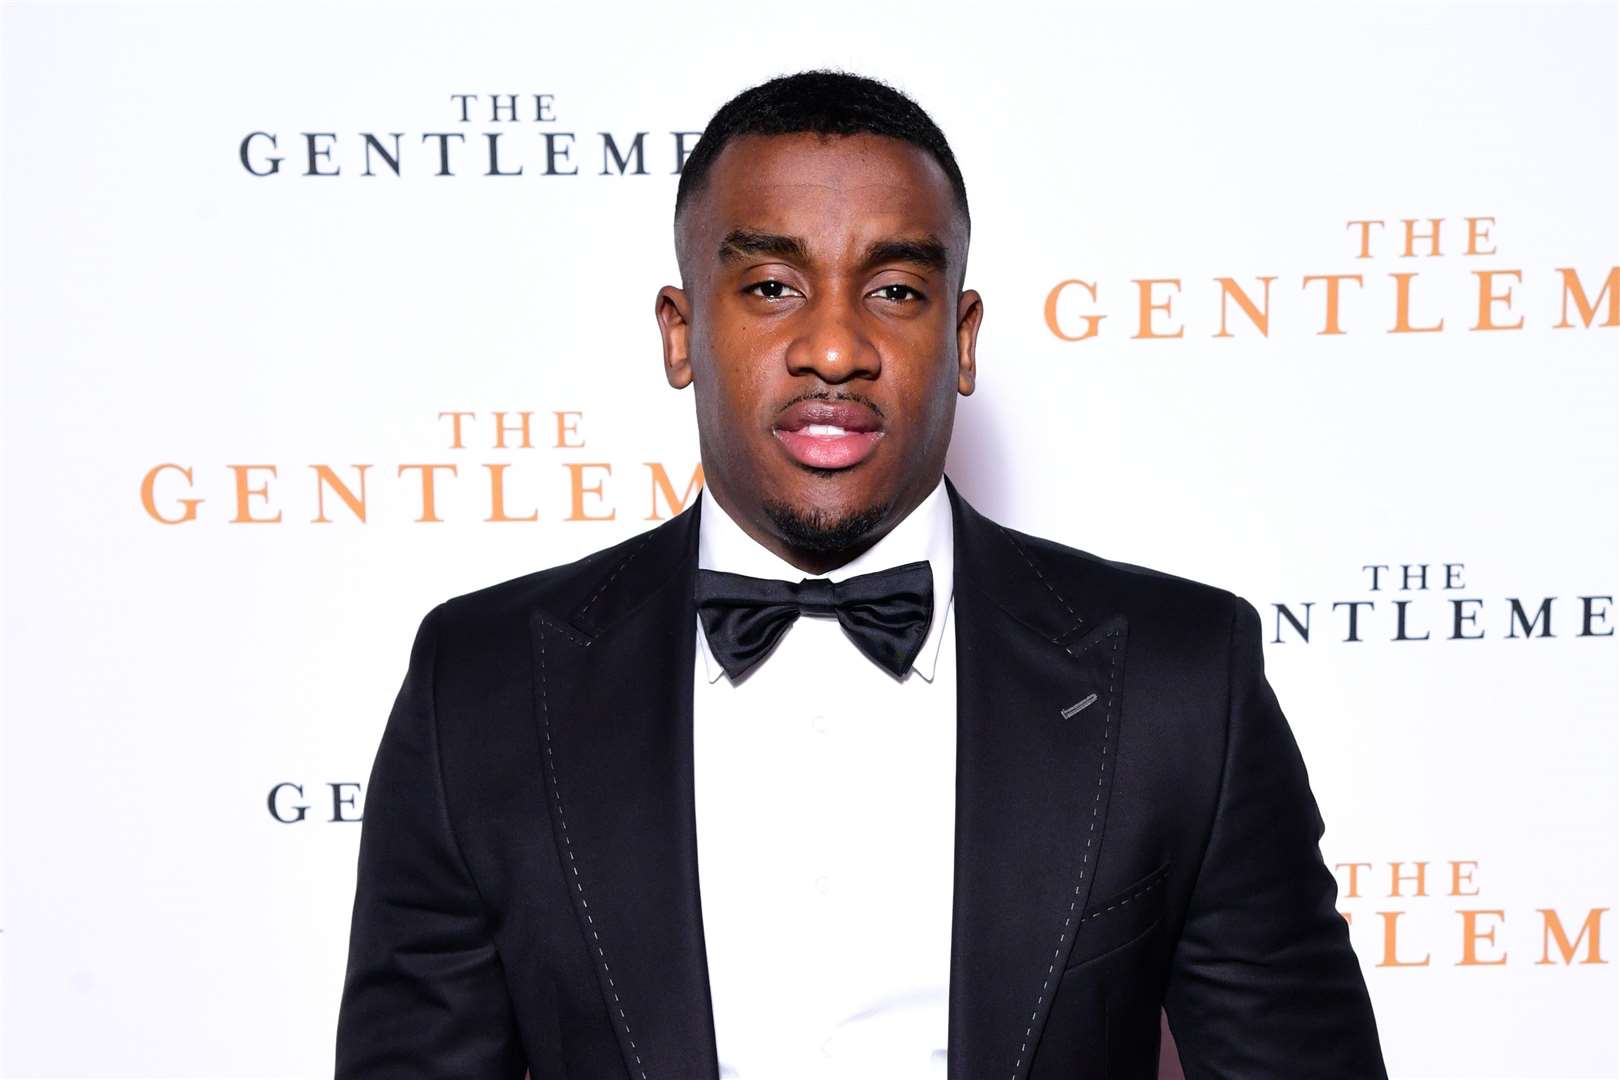 Rapper Bugzy Malone punched two men ‘in self-defence’ after break-in